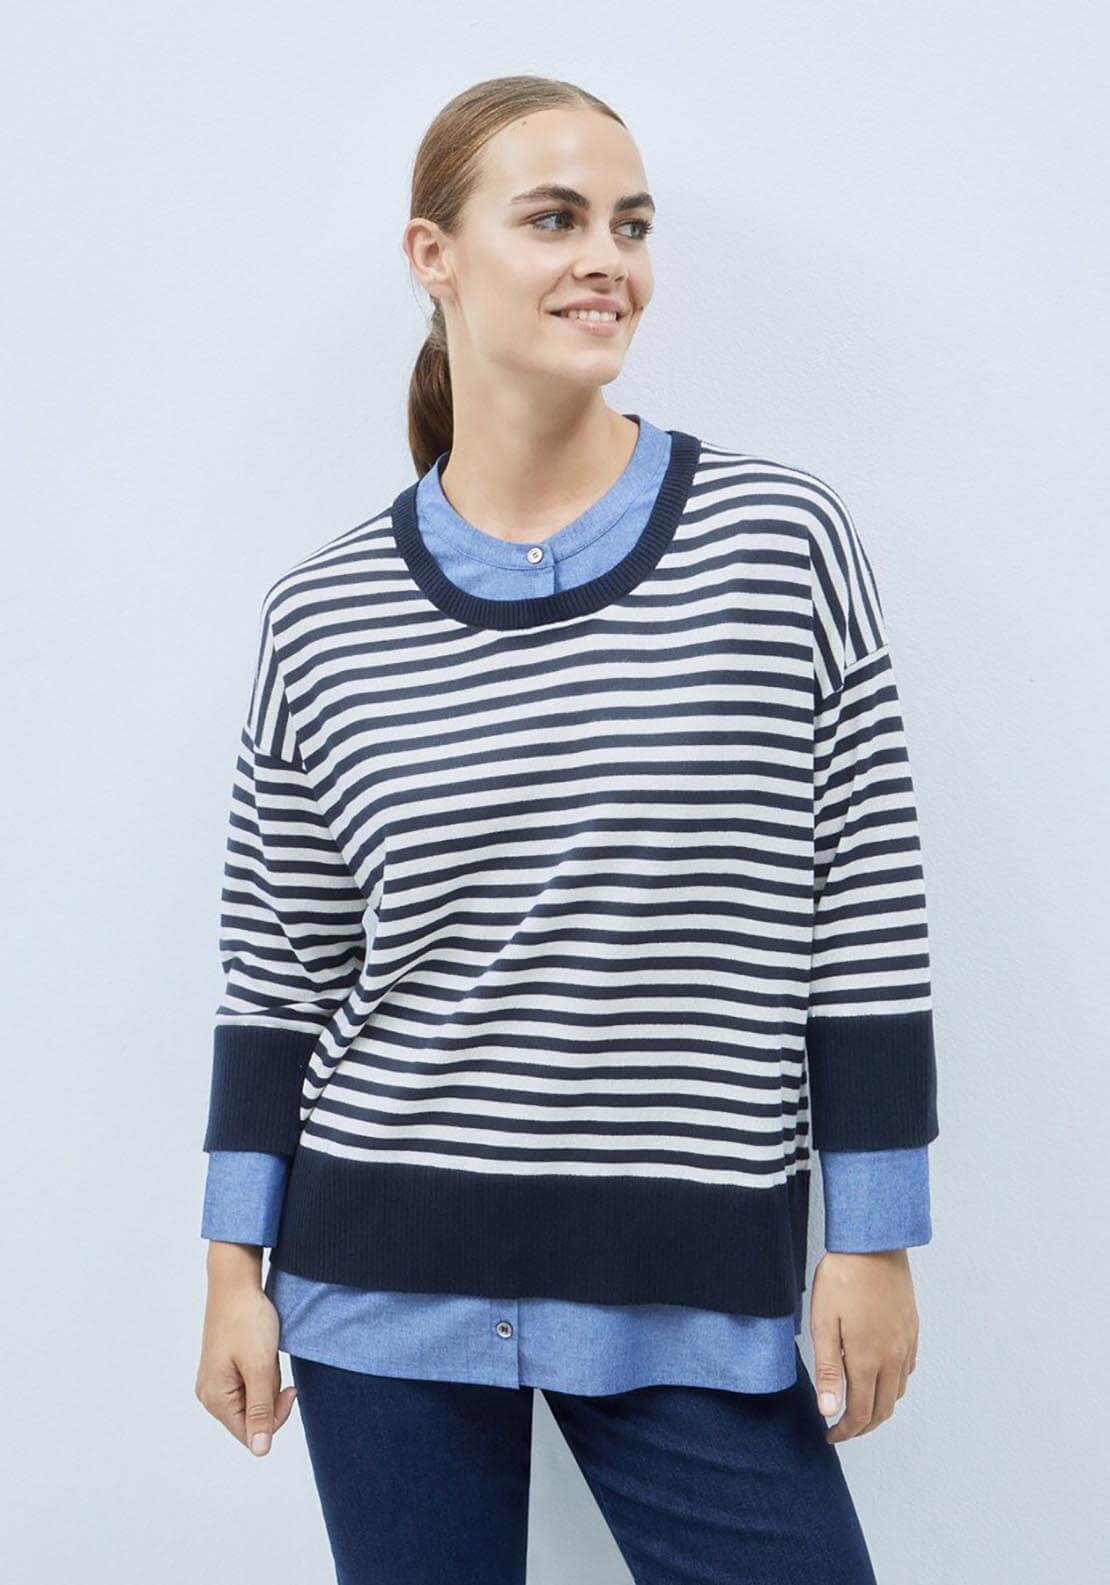 Couchel Striped Sweater 1 Shaws Department Stores